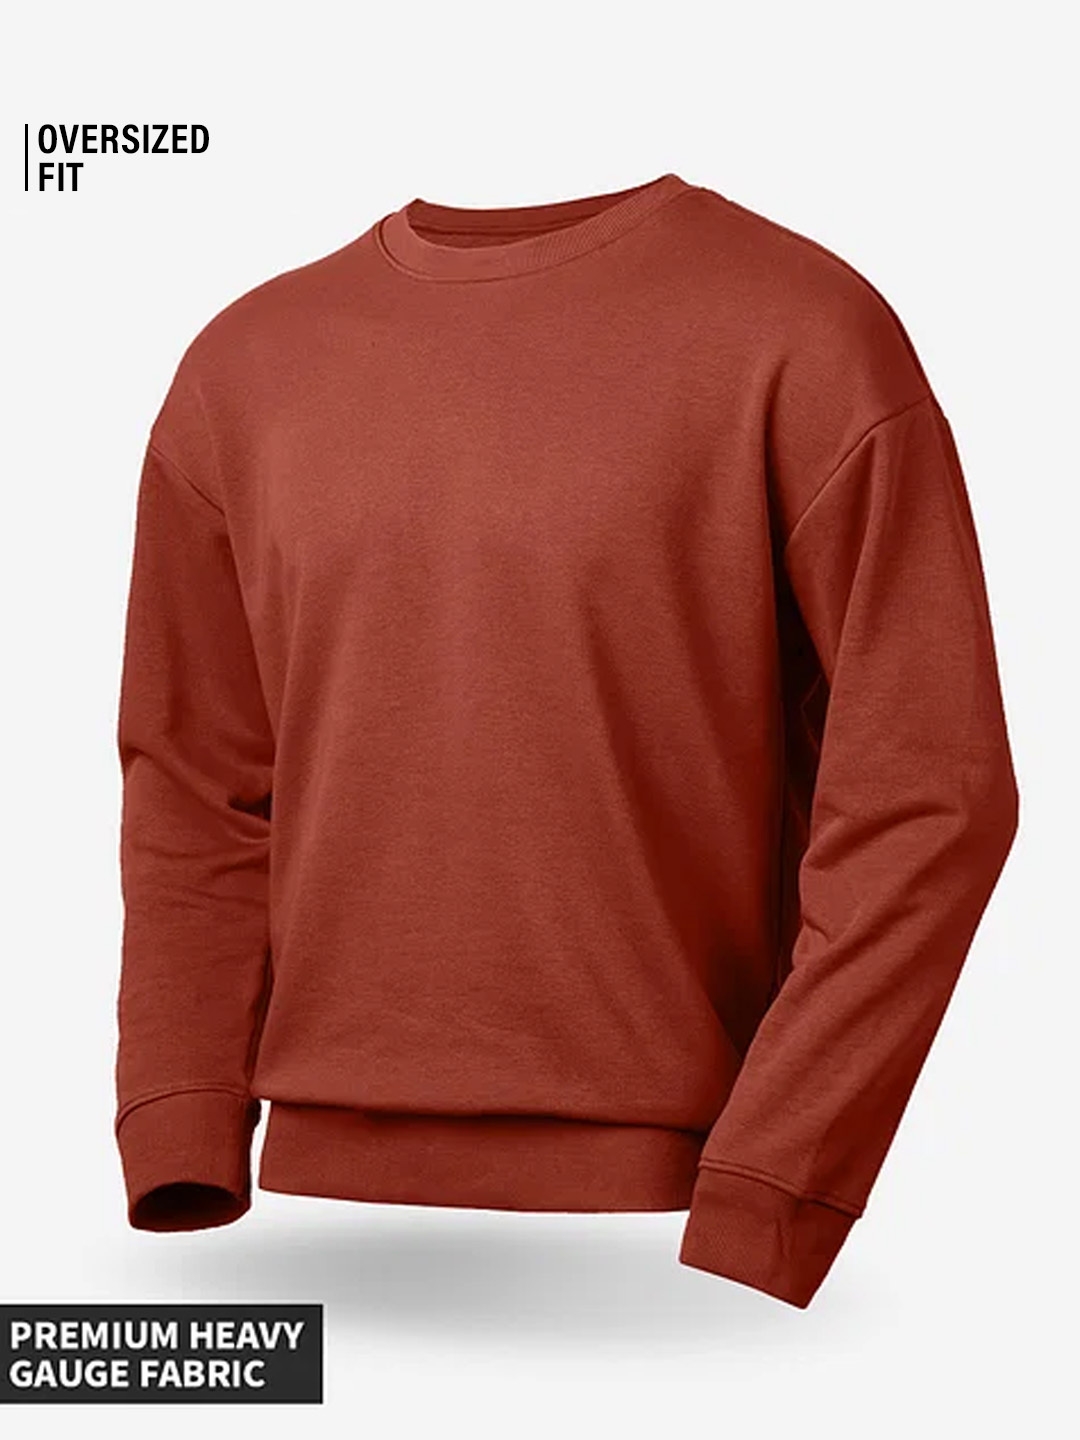 The Souled Store | Men's Solids: Red Clay Men's Oversized Sweatshirts